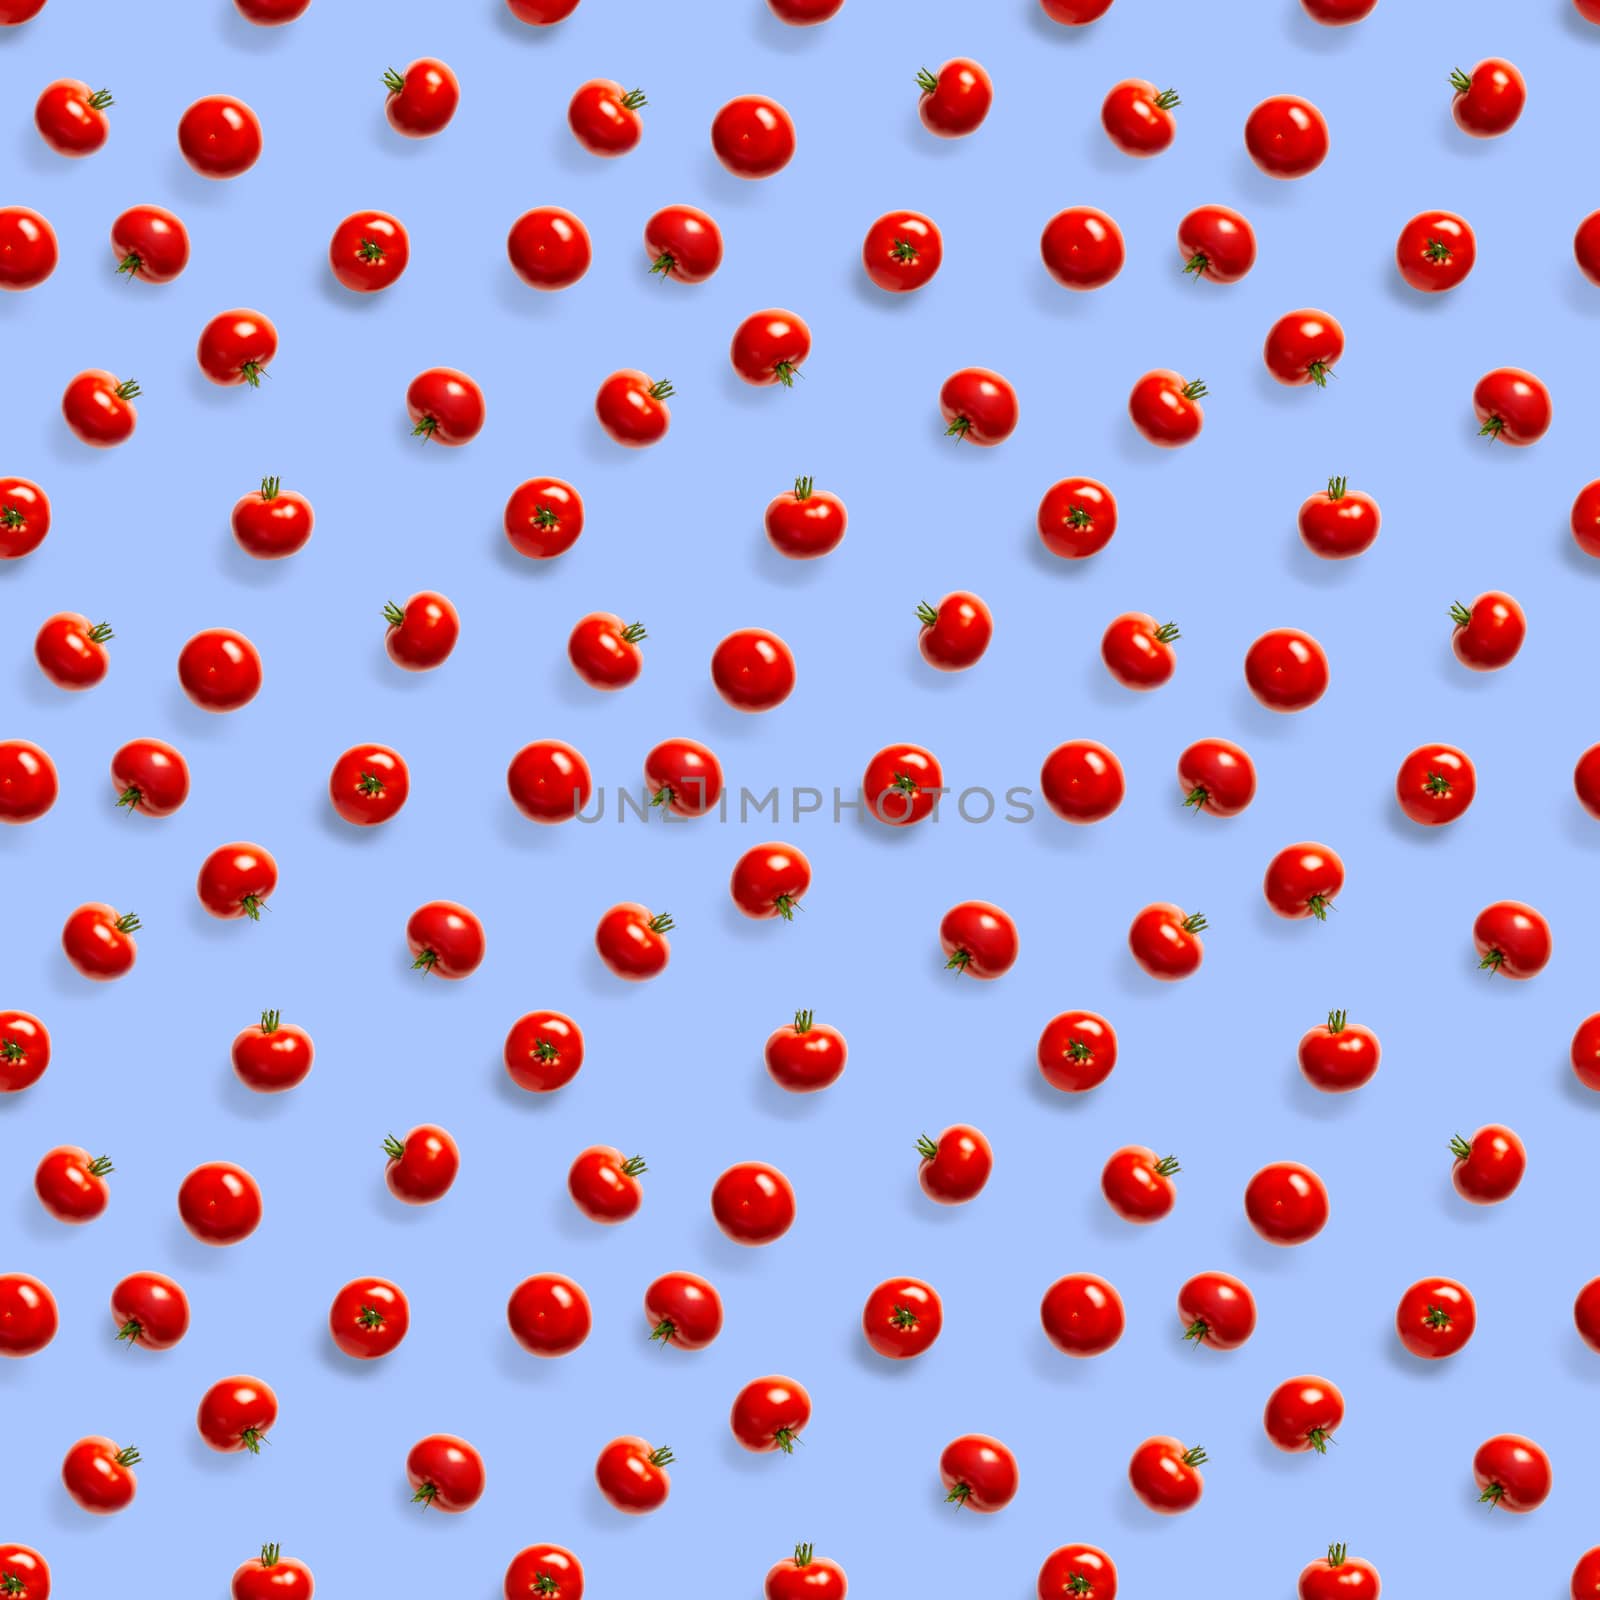 Seamless pattern with red ripe tomatoes. Tomato isolated on blue background. Vegetable abstract seamless pattern. Organic Tomatoes flat lay.